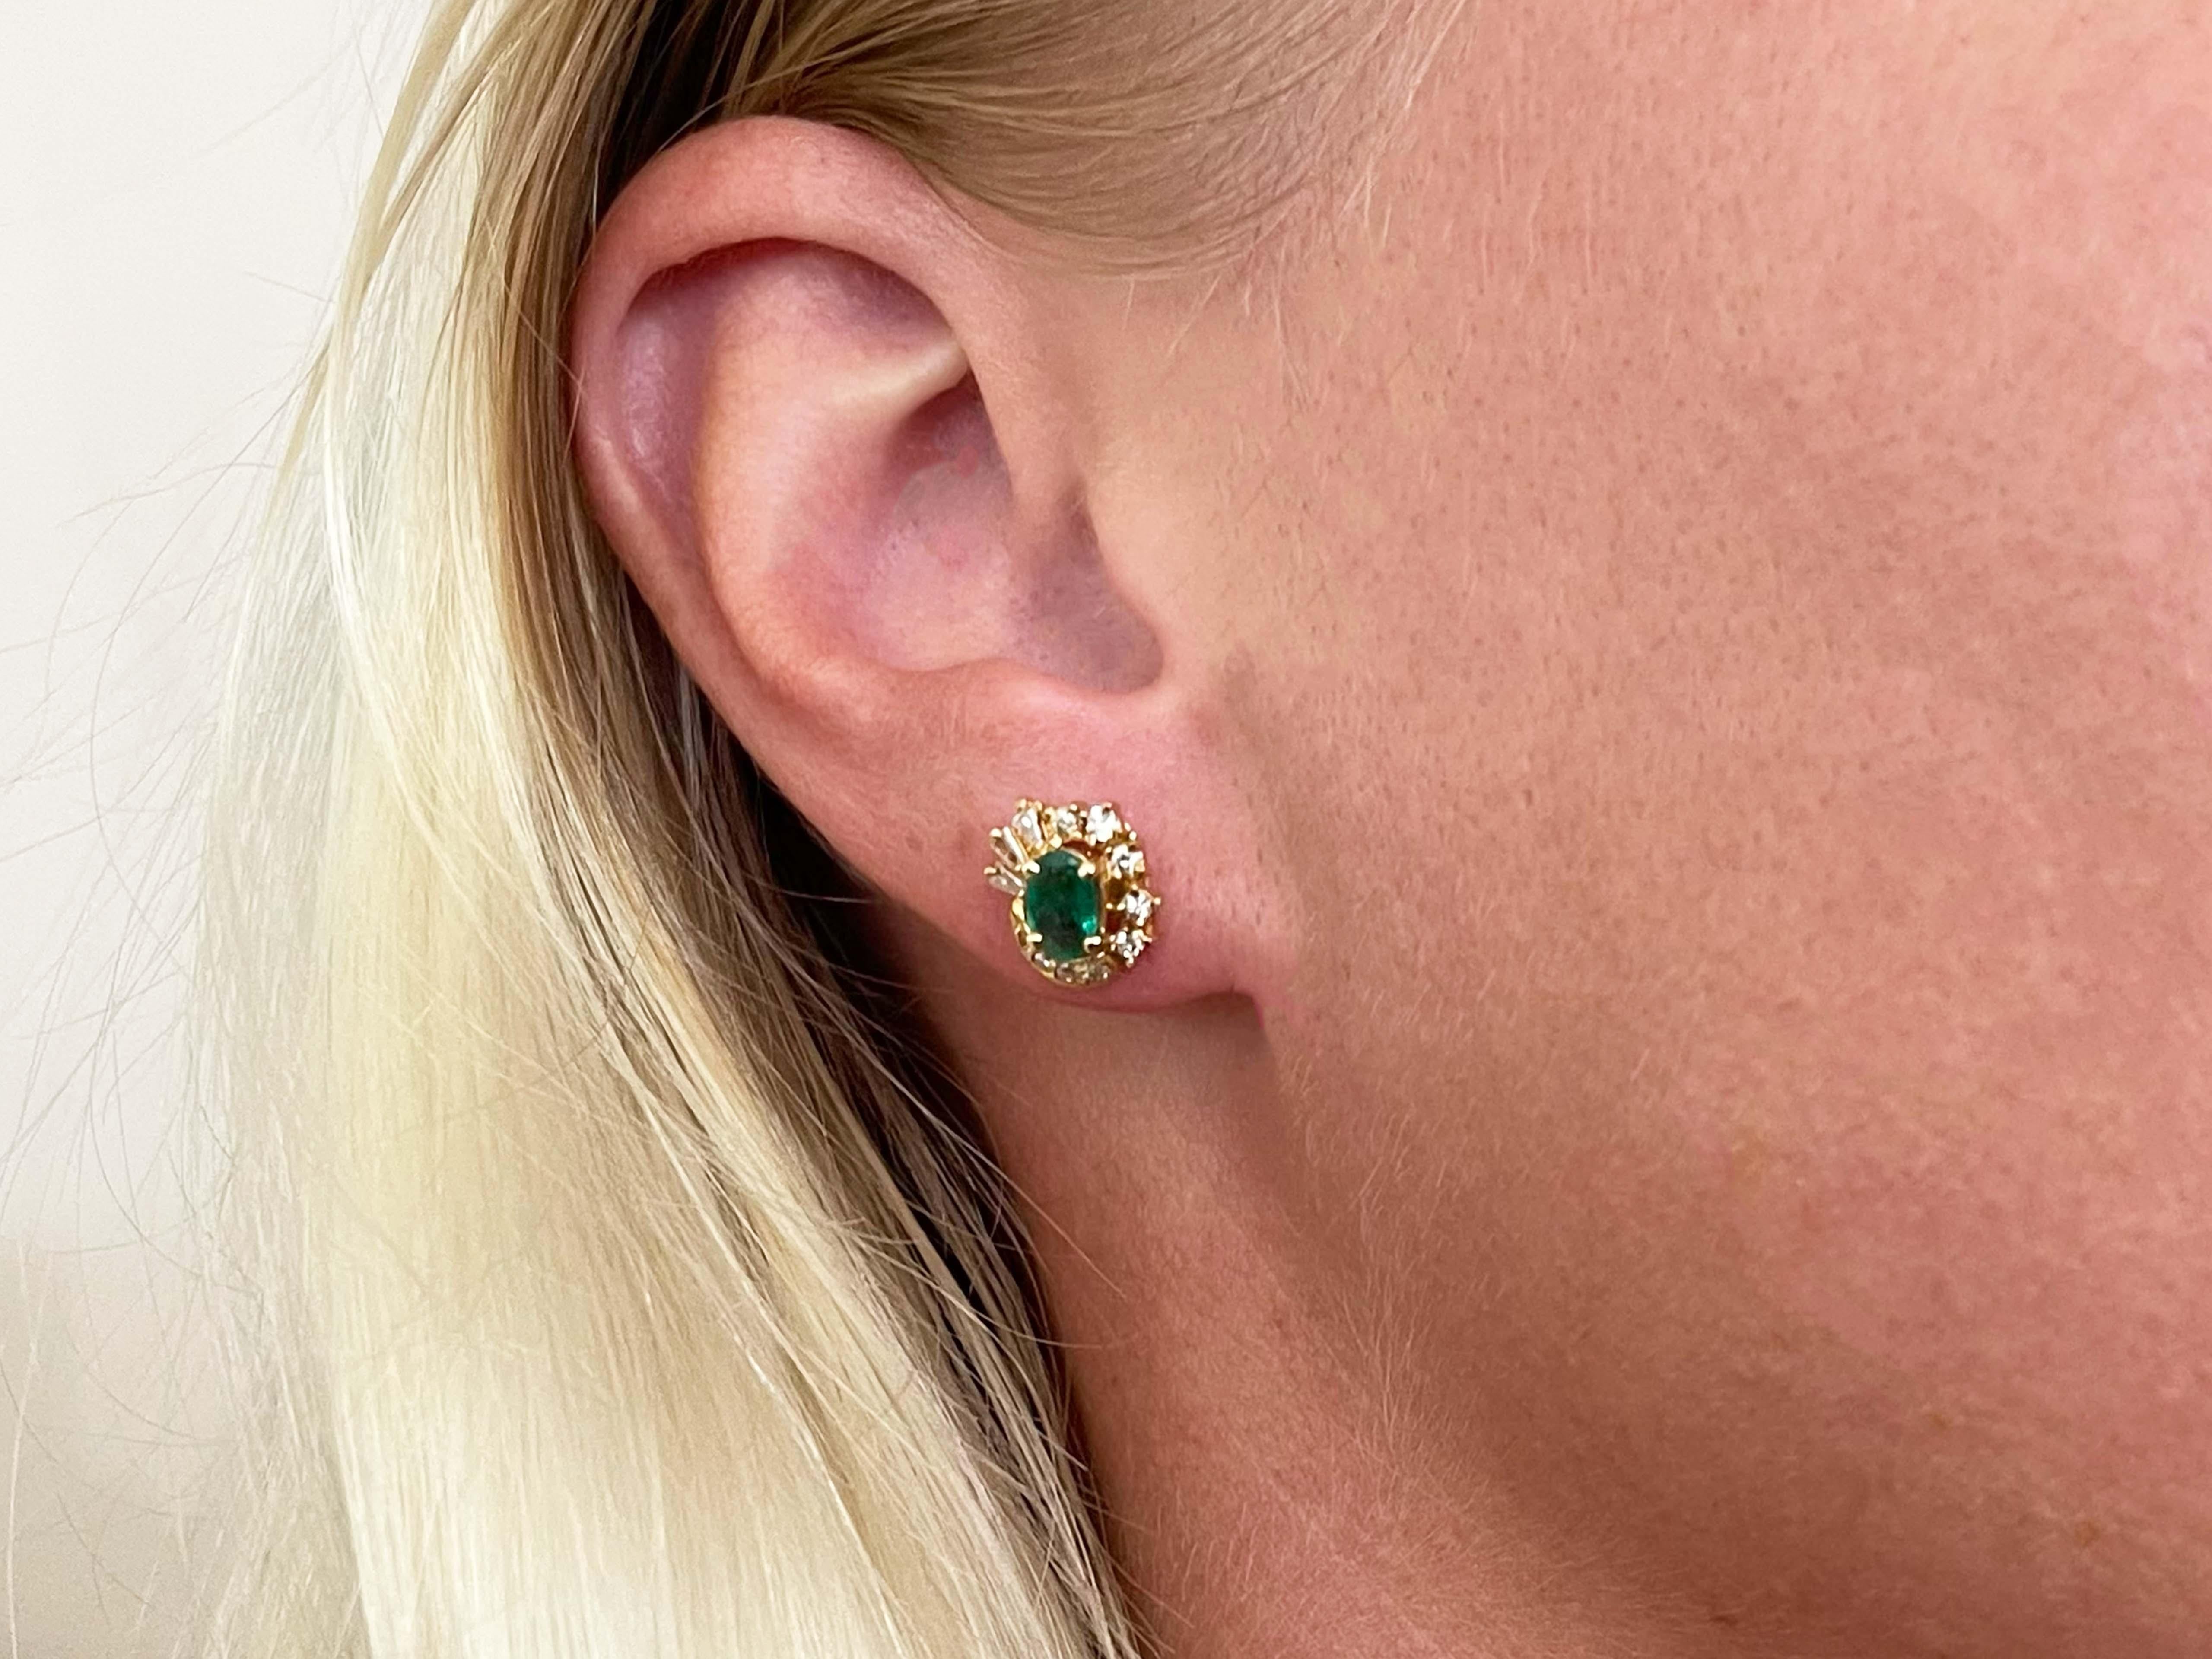 Earrings Specifications:

Metal: 18k Yellow Gold

Earring Measurements: 11.3 mm x 9 mm

Total Weight: 3.5 Grams

Emeralds: 2

Emerald Carat Weight: 0.70 carats
​
​Emerald Measurements: 6.02 mm x 3.98 mm x 2.20 mm

Diamonds: 18 round brilliant + 6